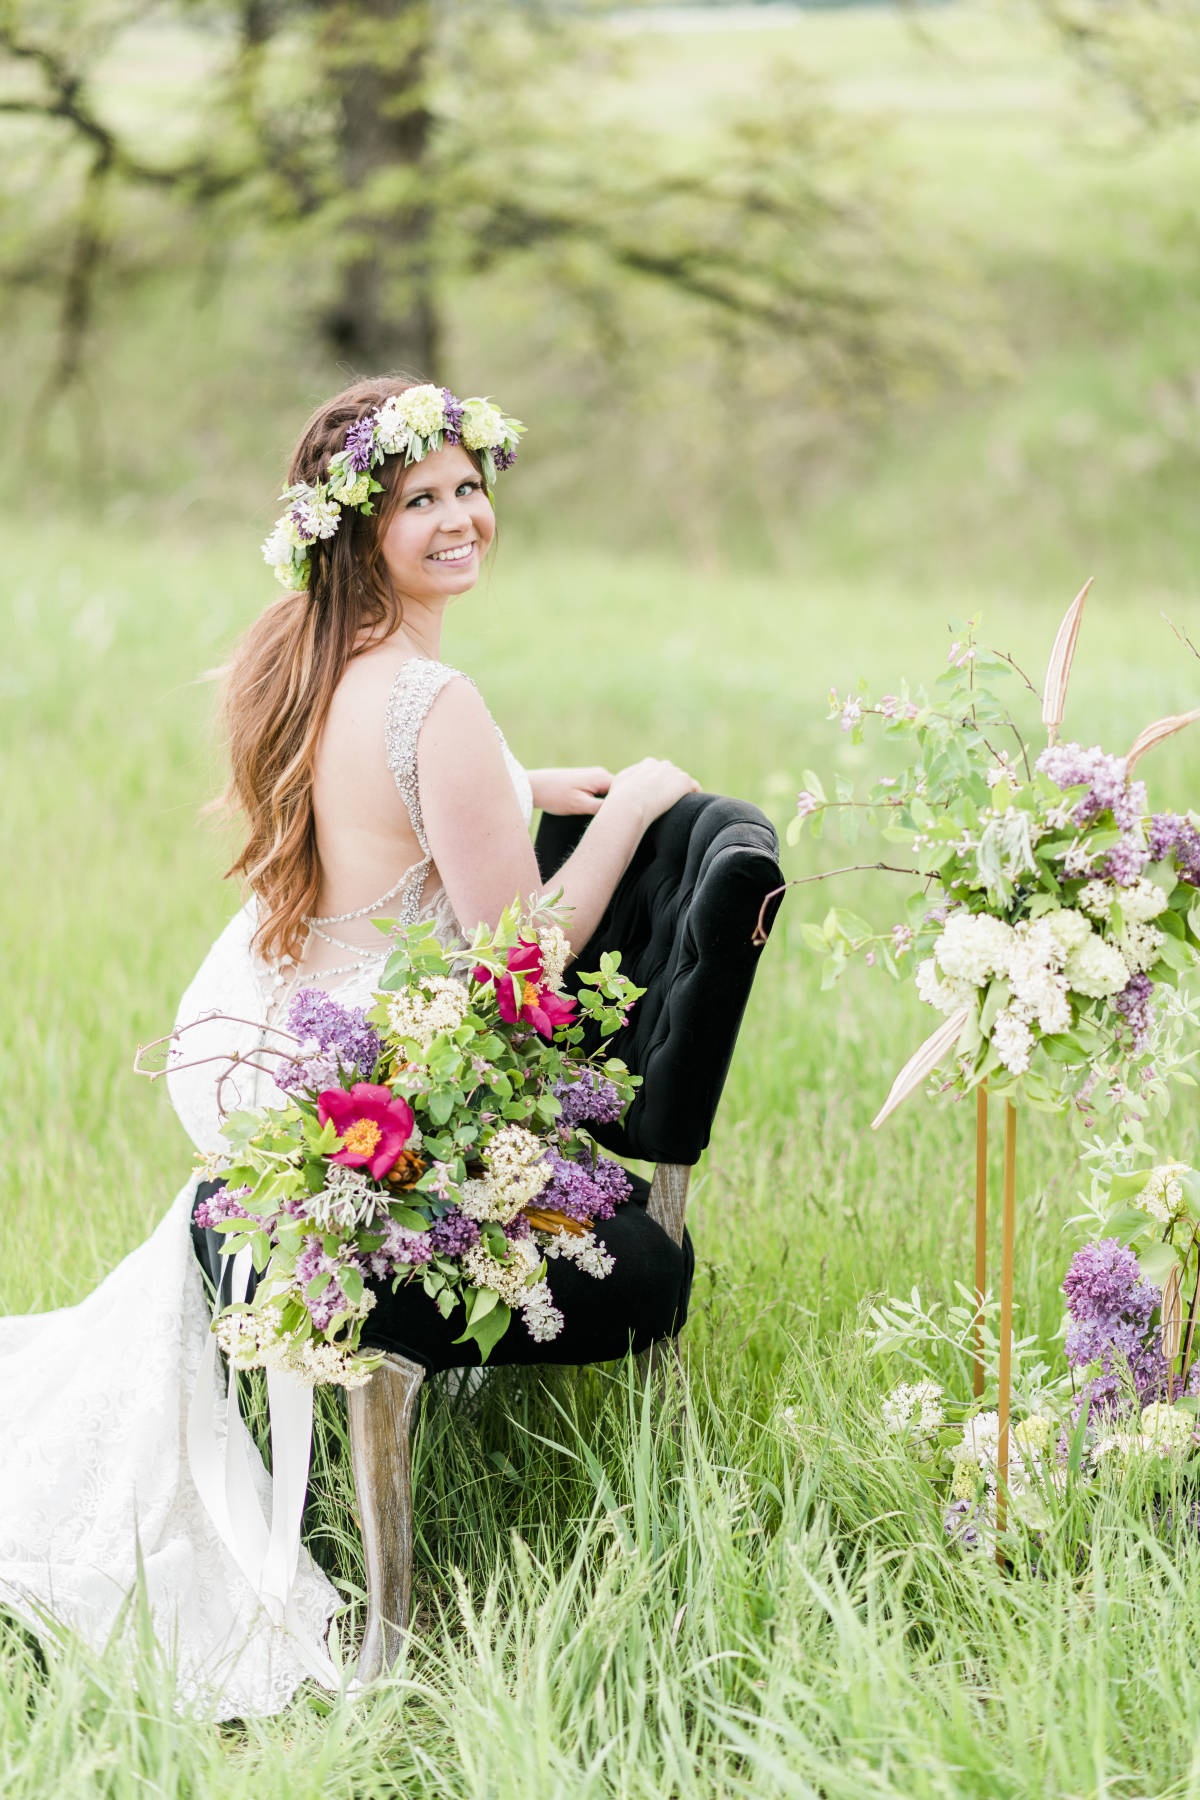 Becoming Blooms Floral & Cora Carroll Photography